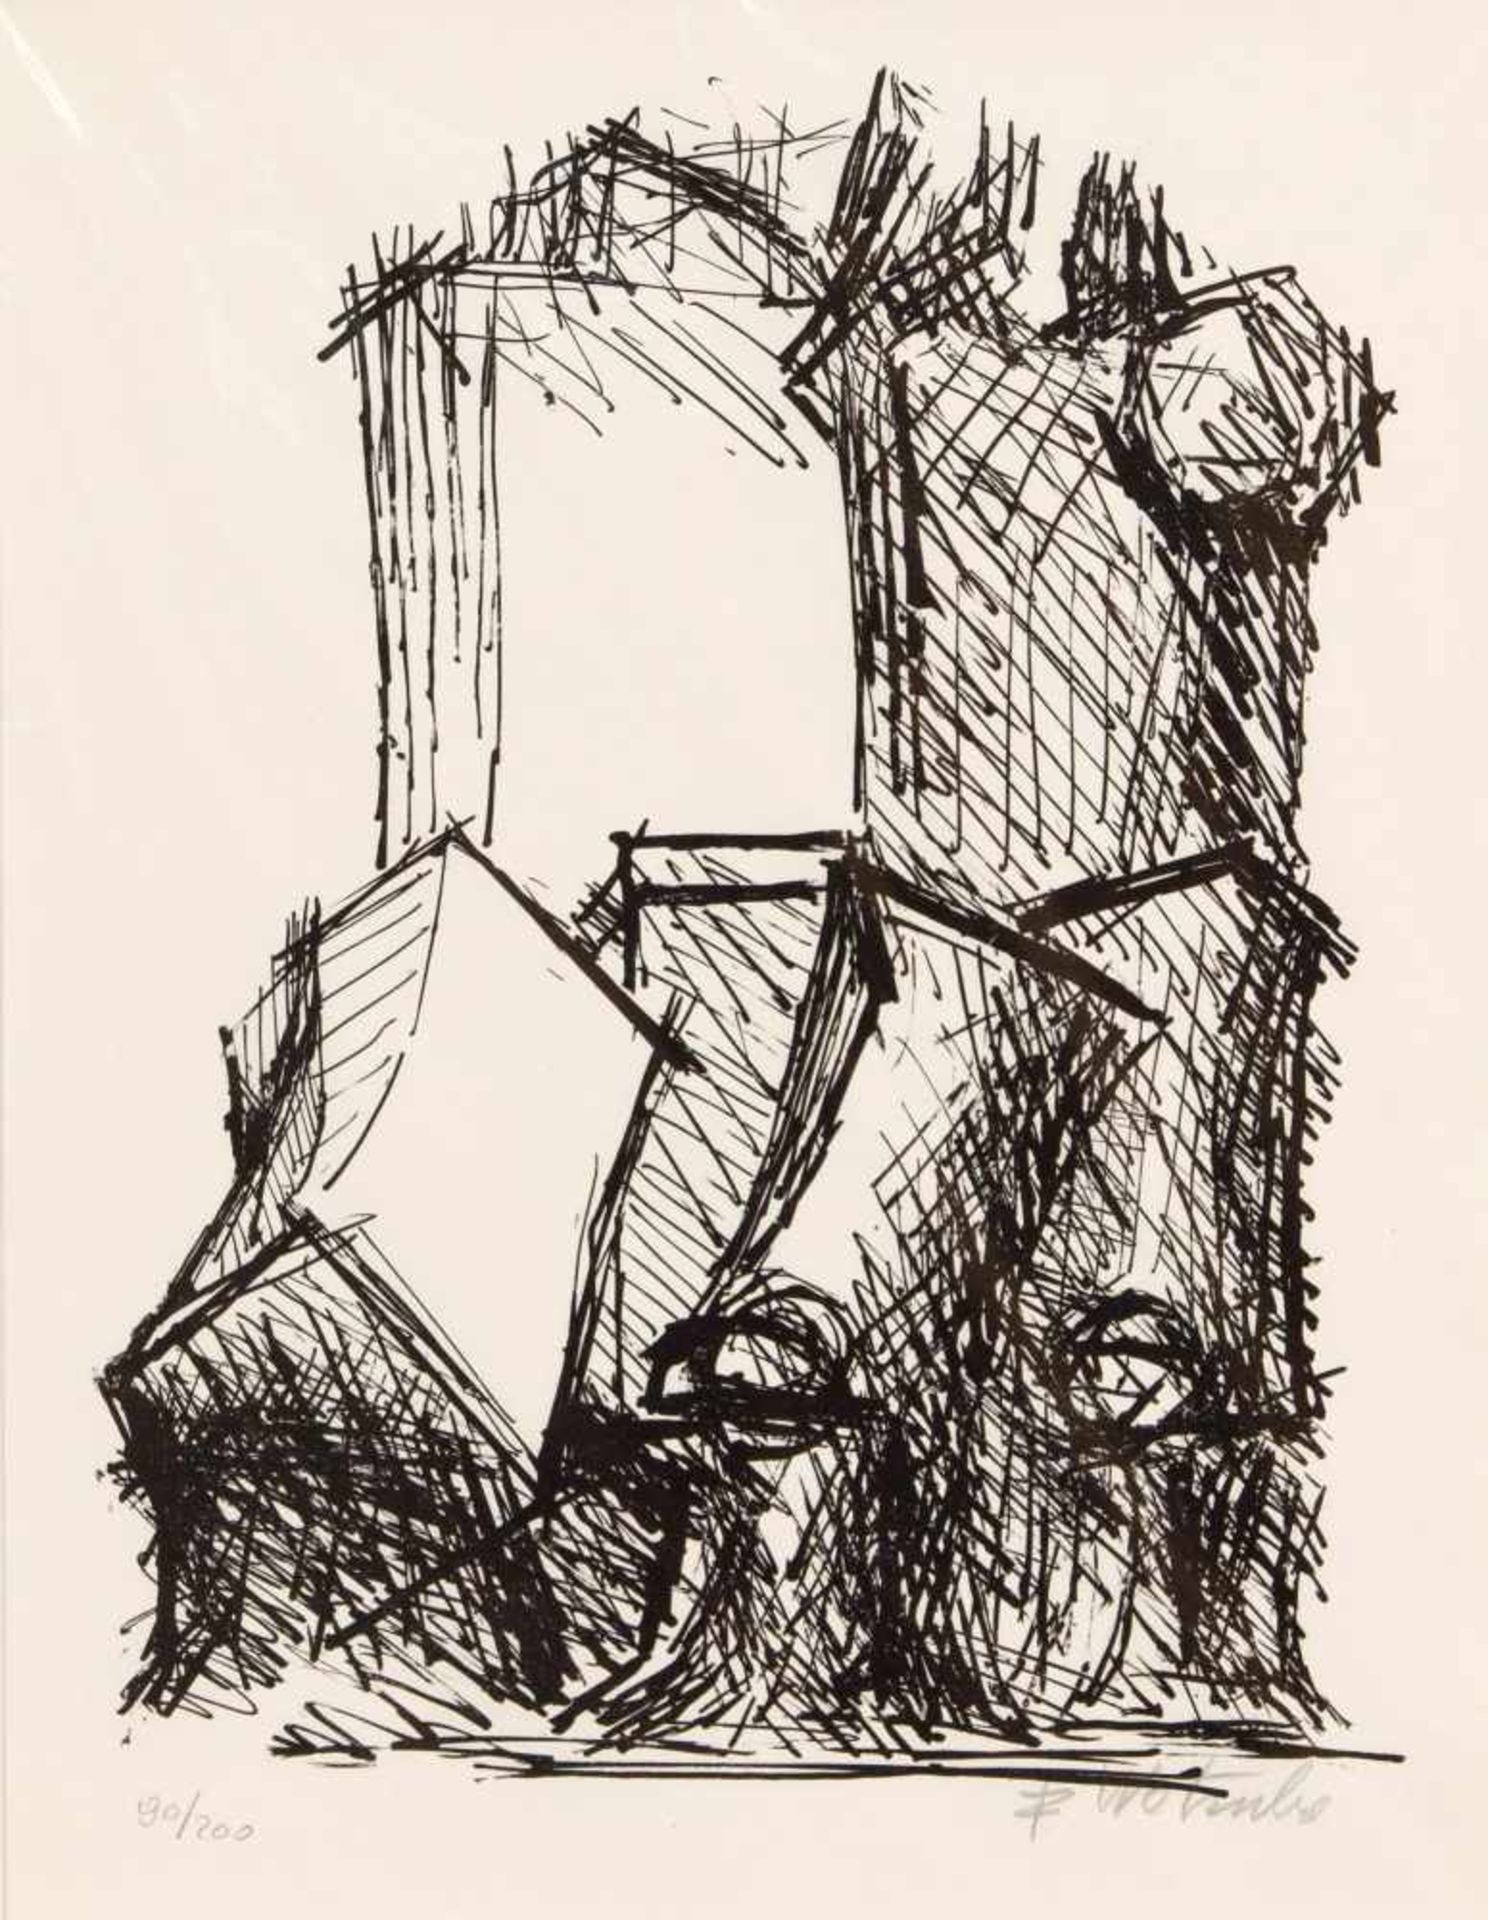 Fritz Wotruba (1907-1975), composition of stacked forms, lithograph on laid paper 1972,handsigned